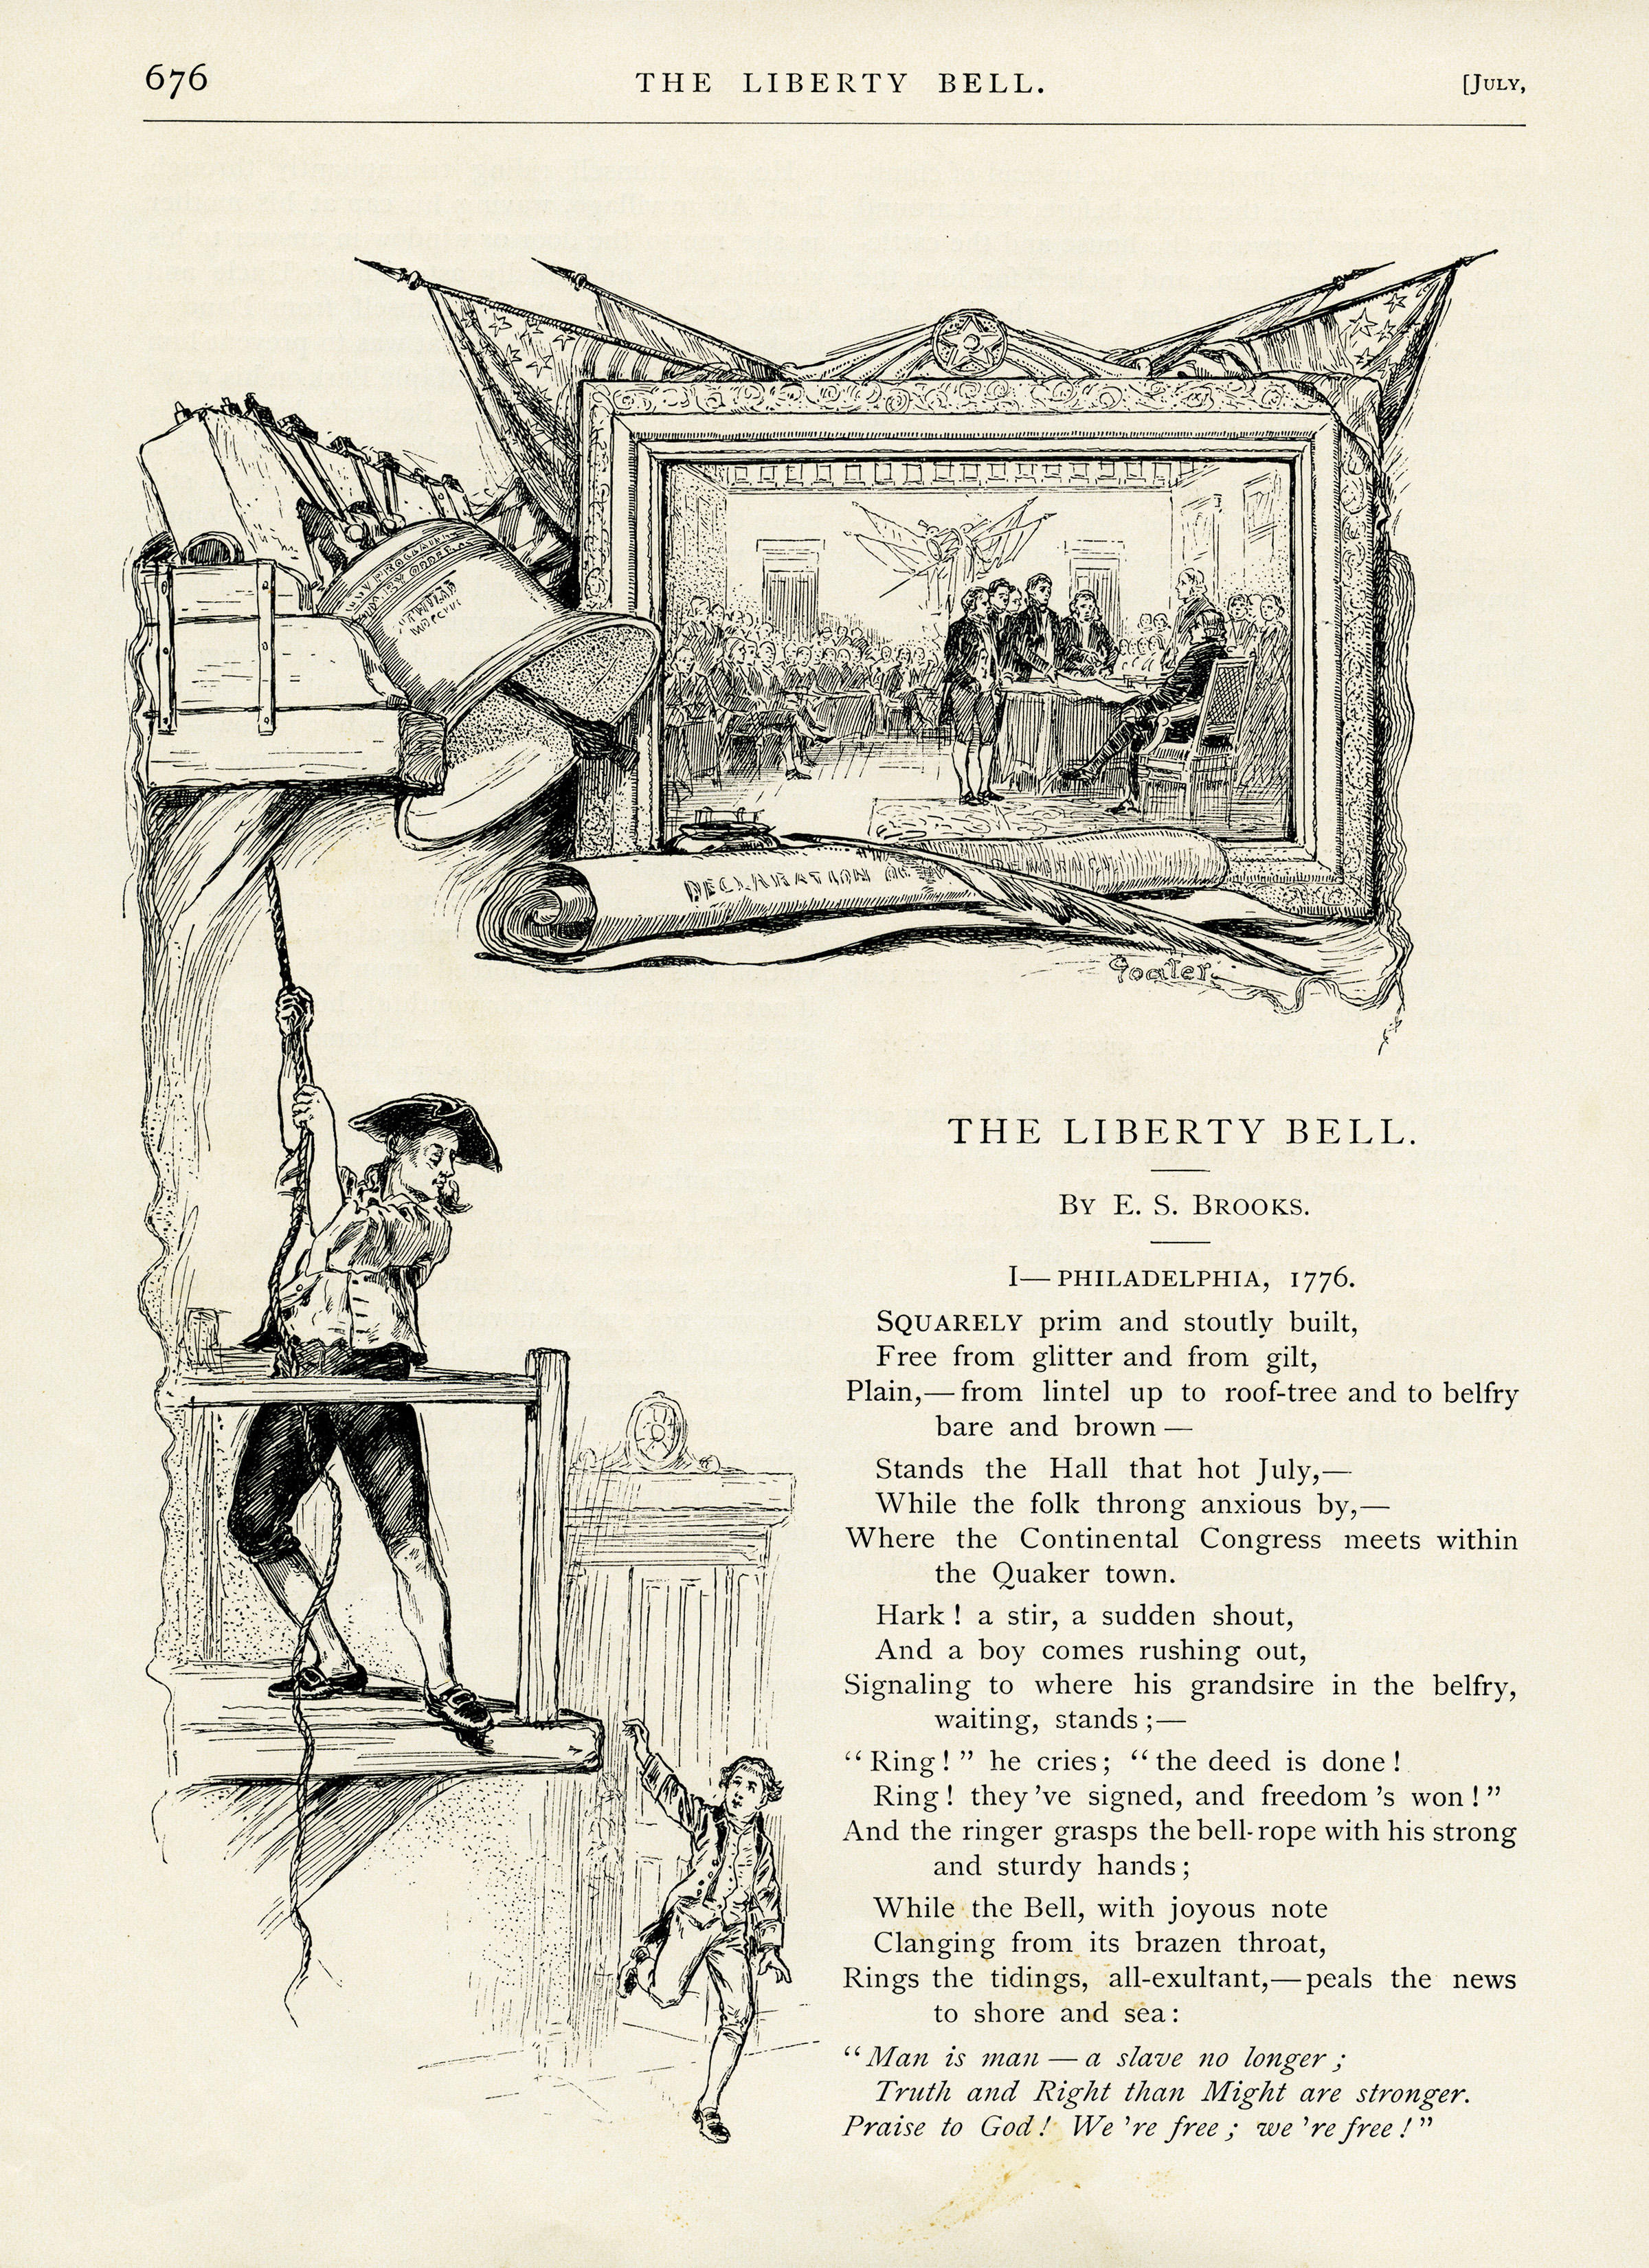 Liberty Bell, E S Brooks, Independence Day images, United States patriotic poem, July 4th, land of the free usa, vintage patriotic art